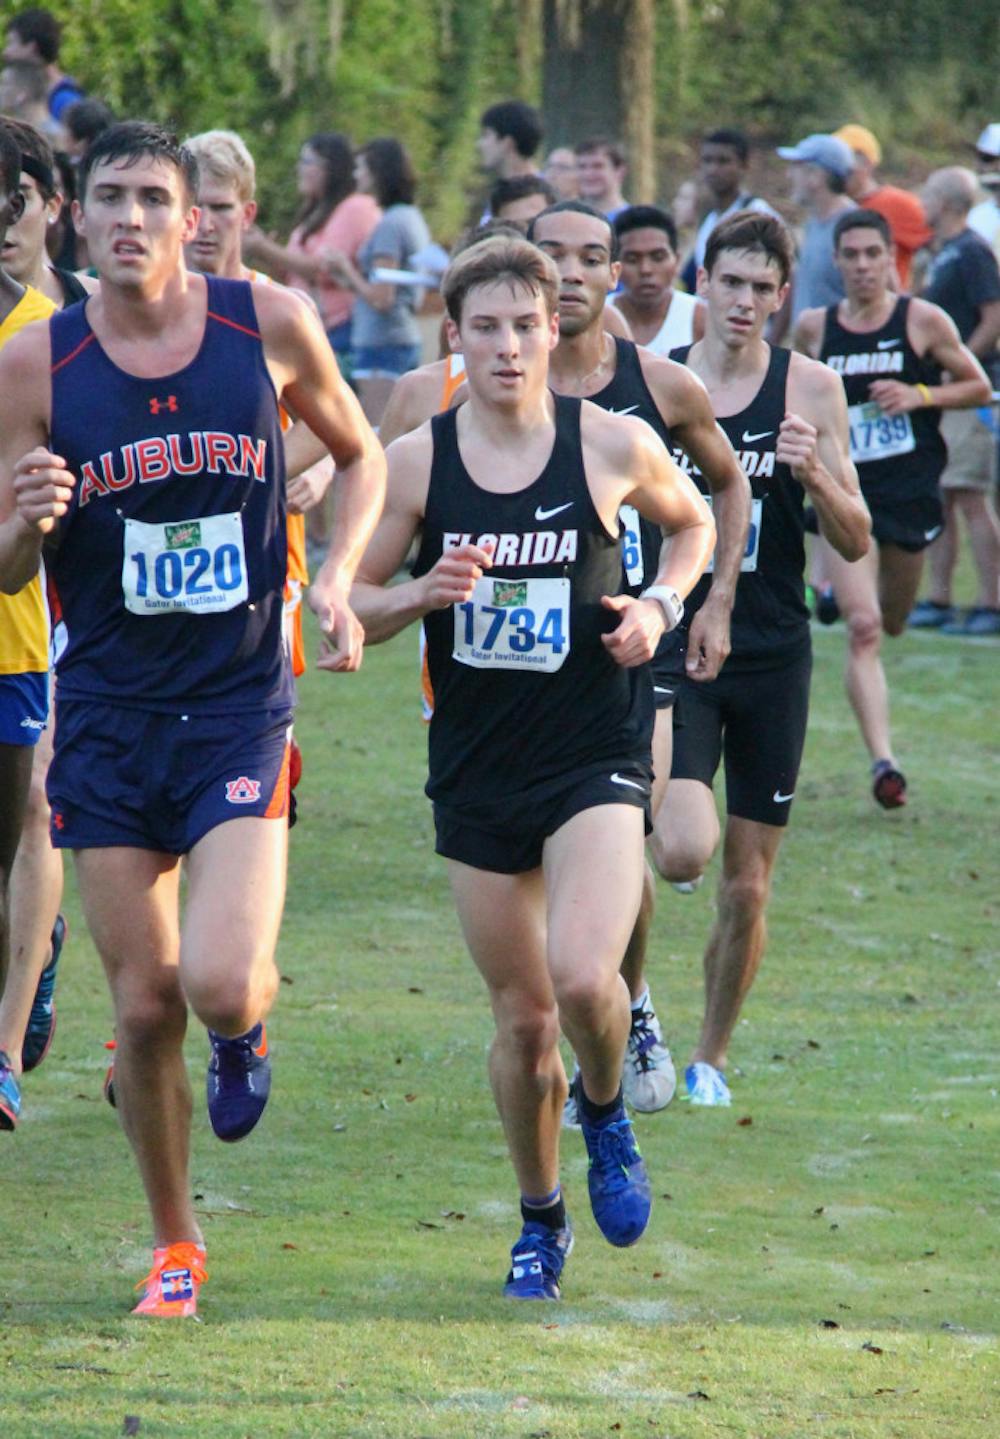 <p>Junior Jimmy Clark (1734) races during the Mountain Dew Invitational on Sept. 14 in Gainesville.</p>